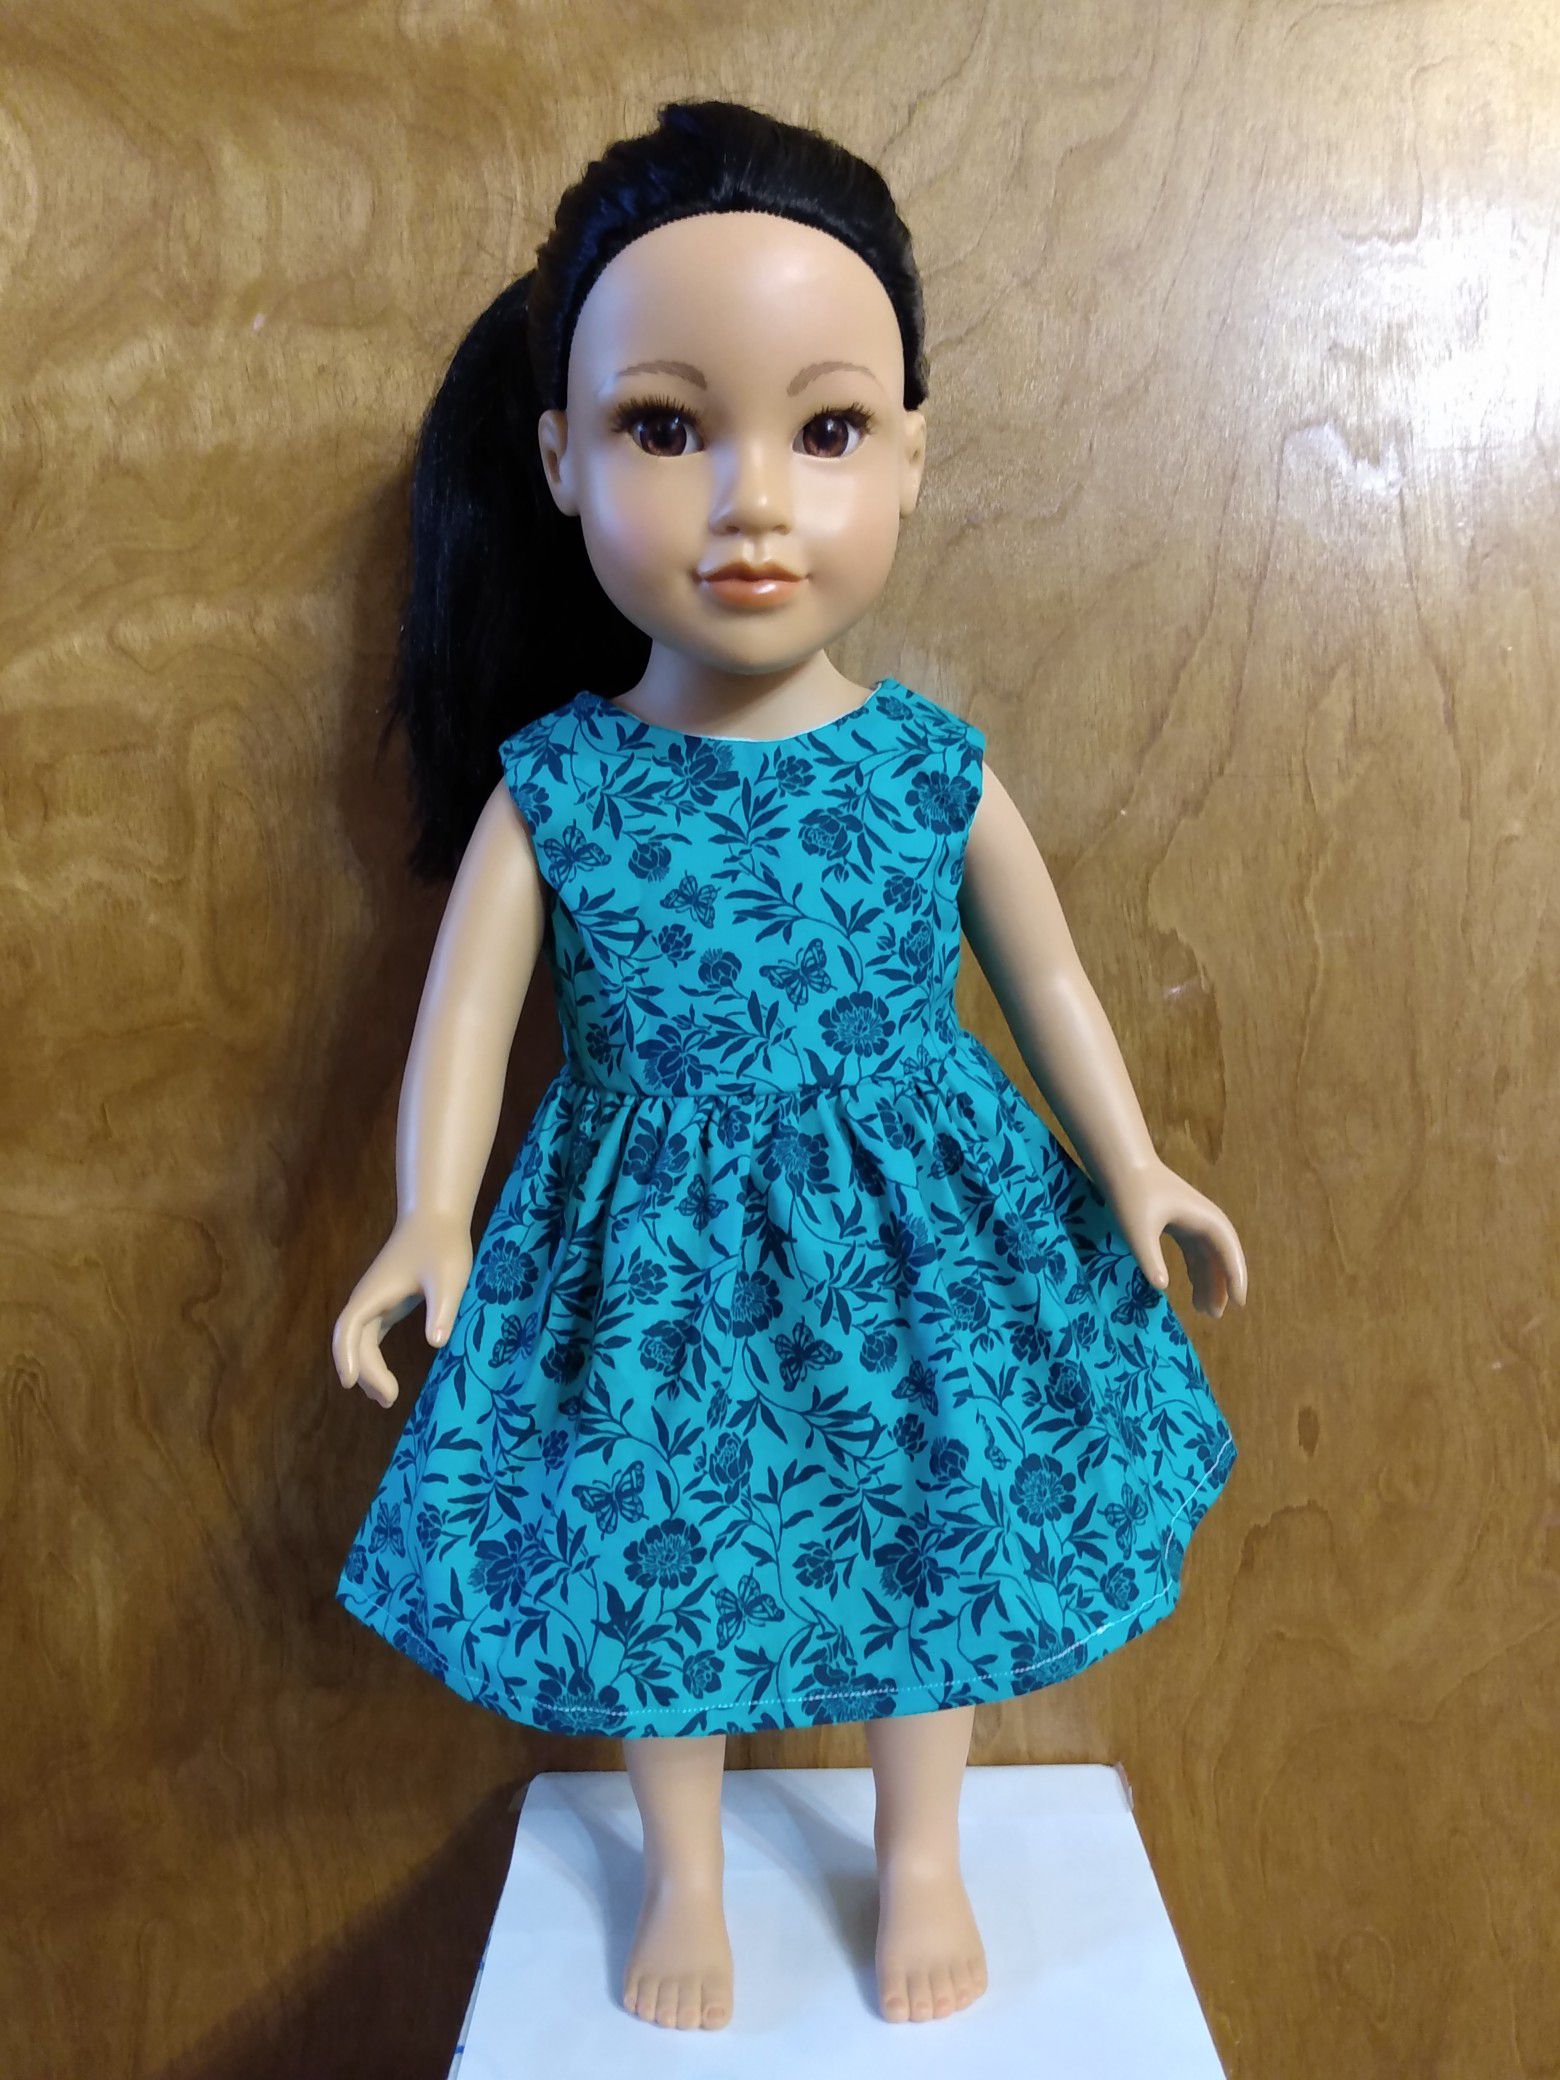 American Girl Or 18"inches doll dress made to fit 18 inches dolls